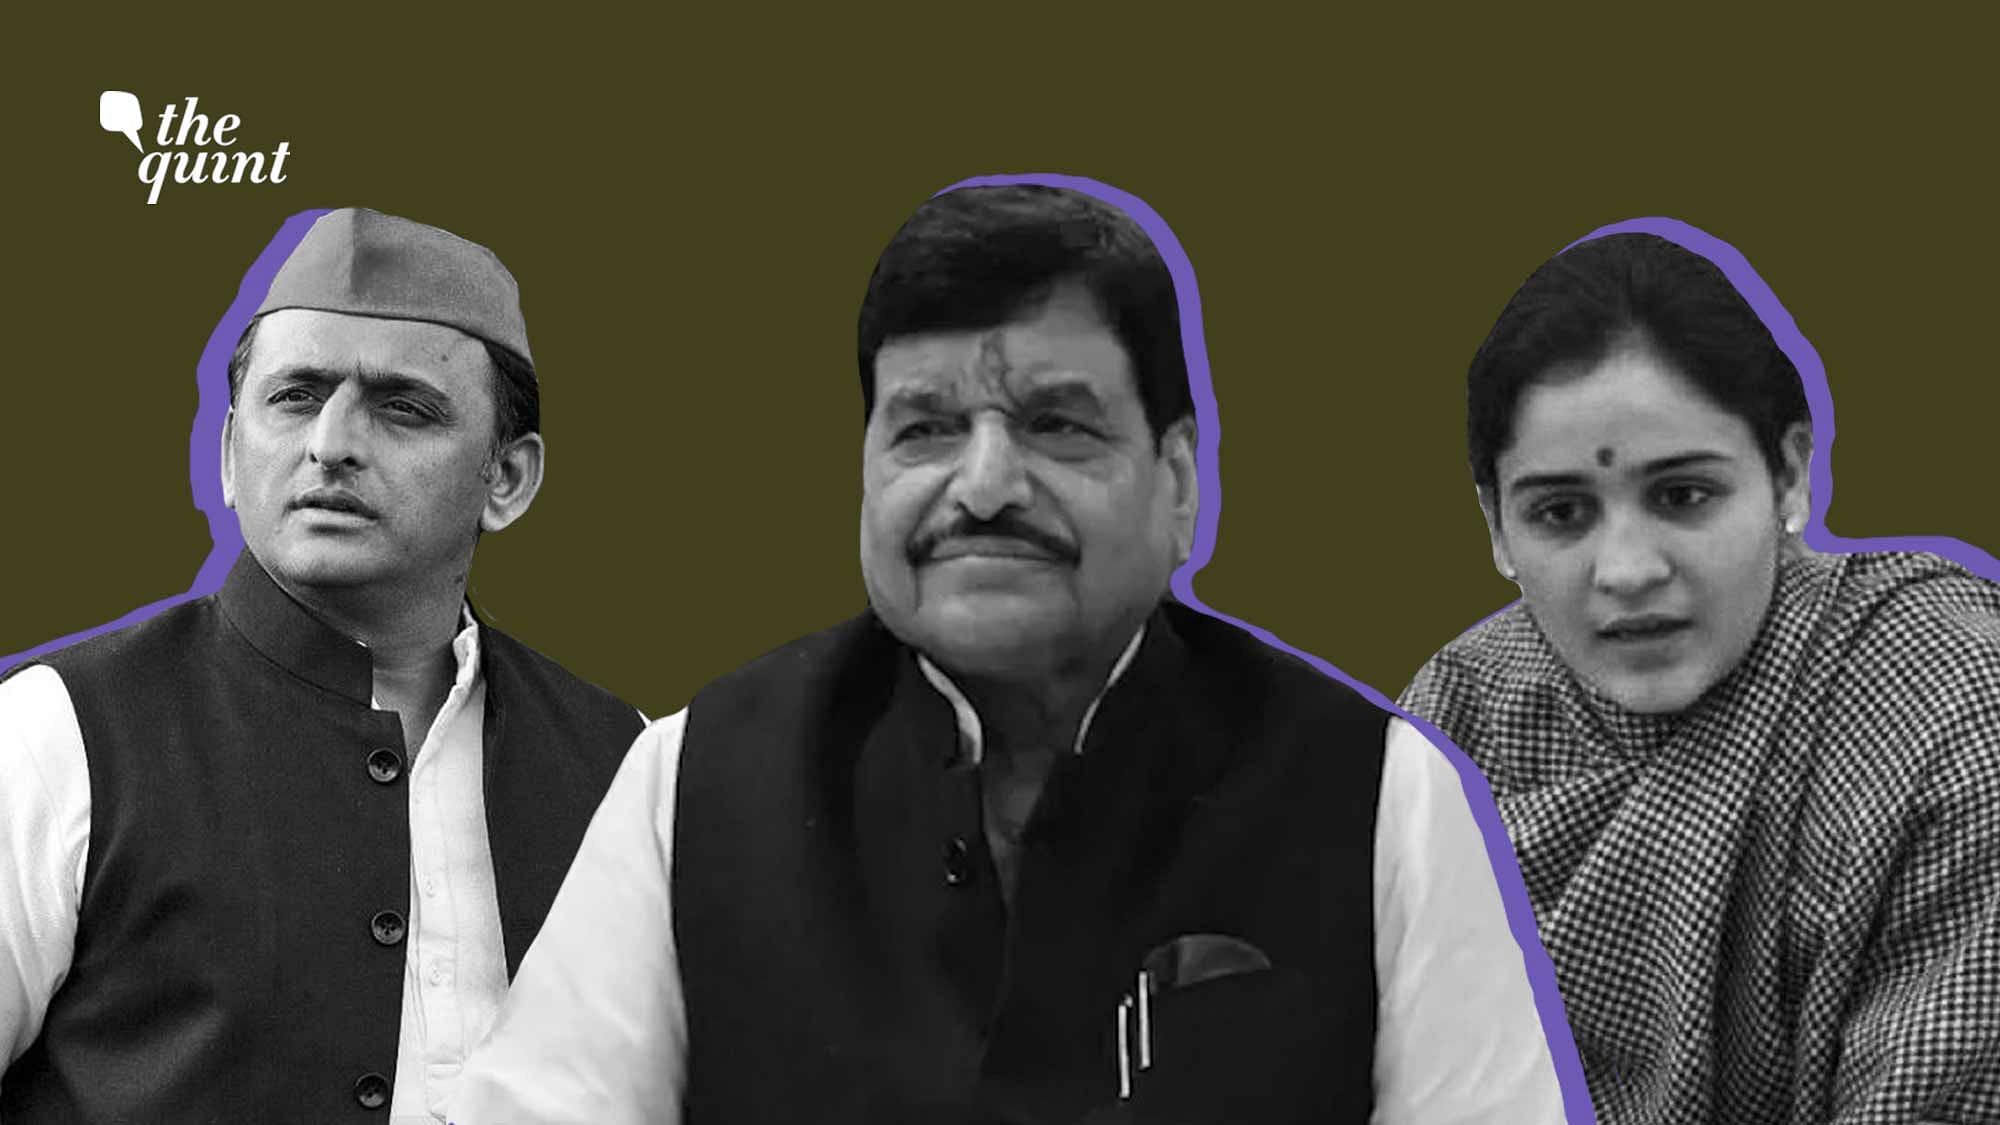 <div class="paragraphs"><p>"Standing together as one family" was the message that SP chief Akhilesh Yadav wanted to send when he managed to get his uncle Shivpal Yadav back into the 'Mulayam' fold. But Aparna's defection has set tongues wagging again.</p></div>